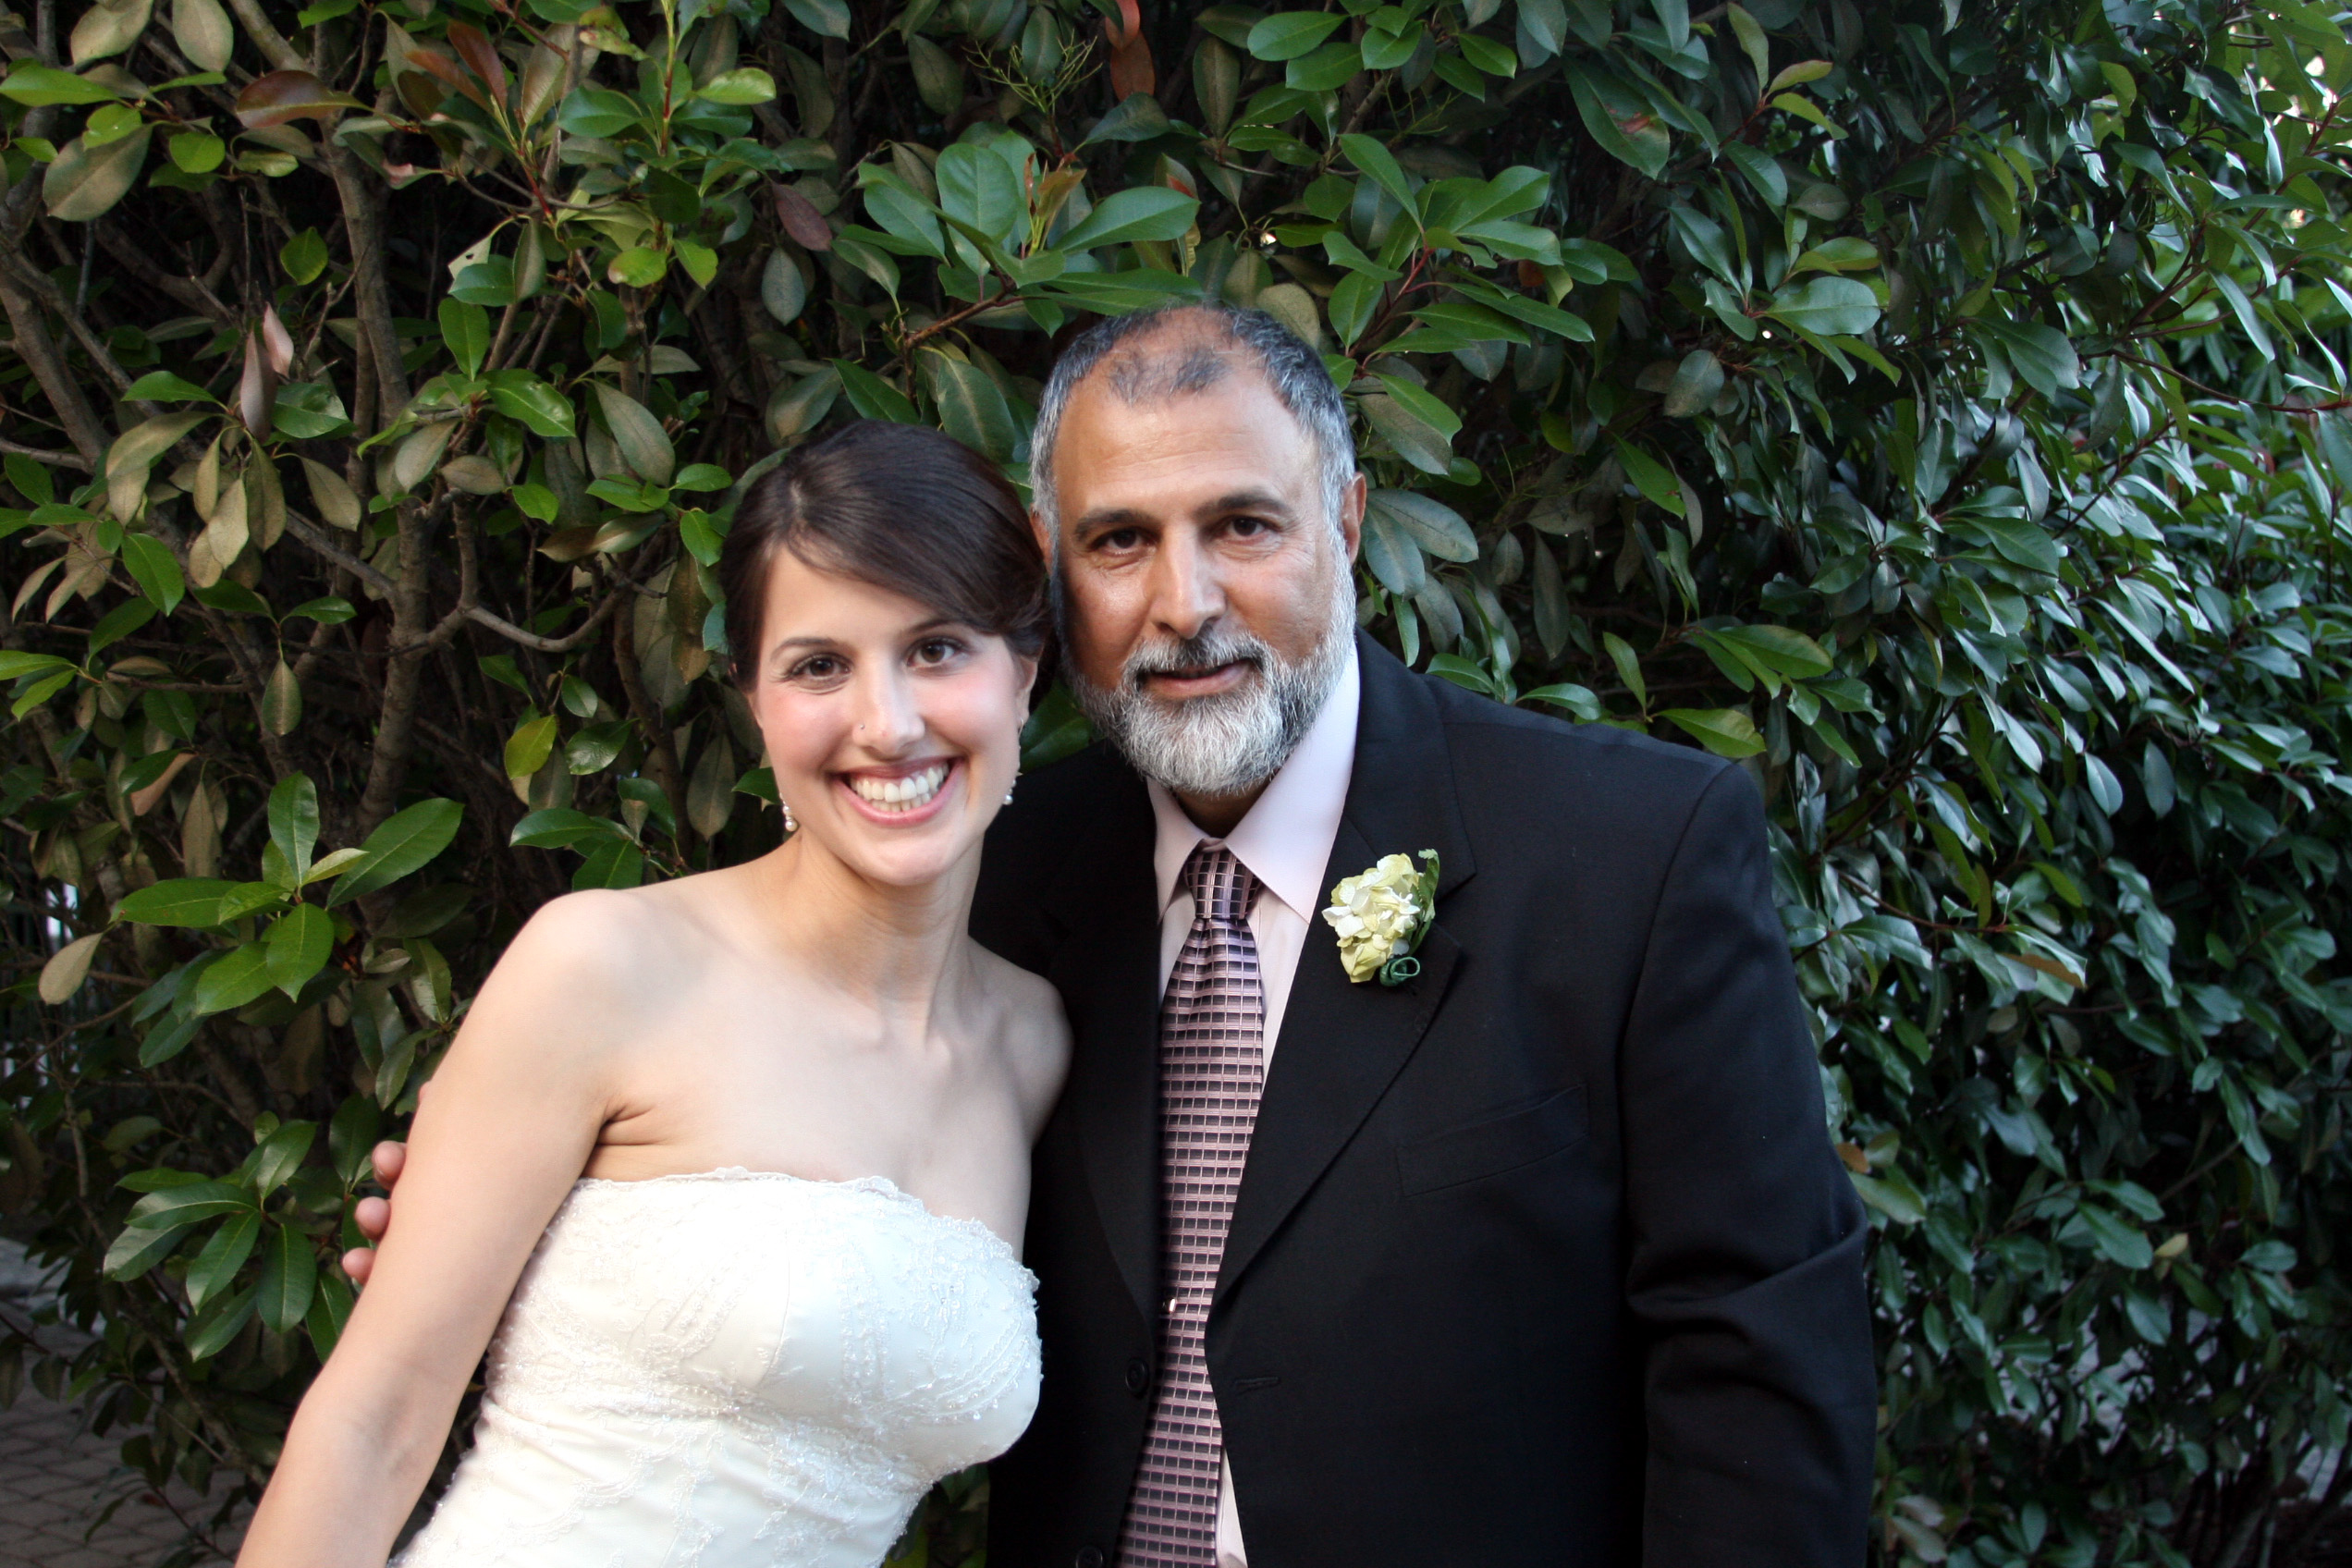 The author poses with her father, an older Iranian man, in a tuxedo. She's in a wedding dress.